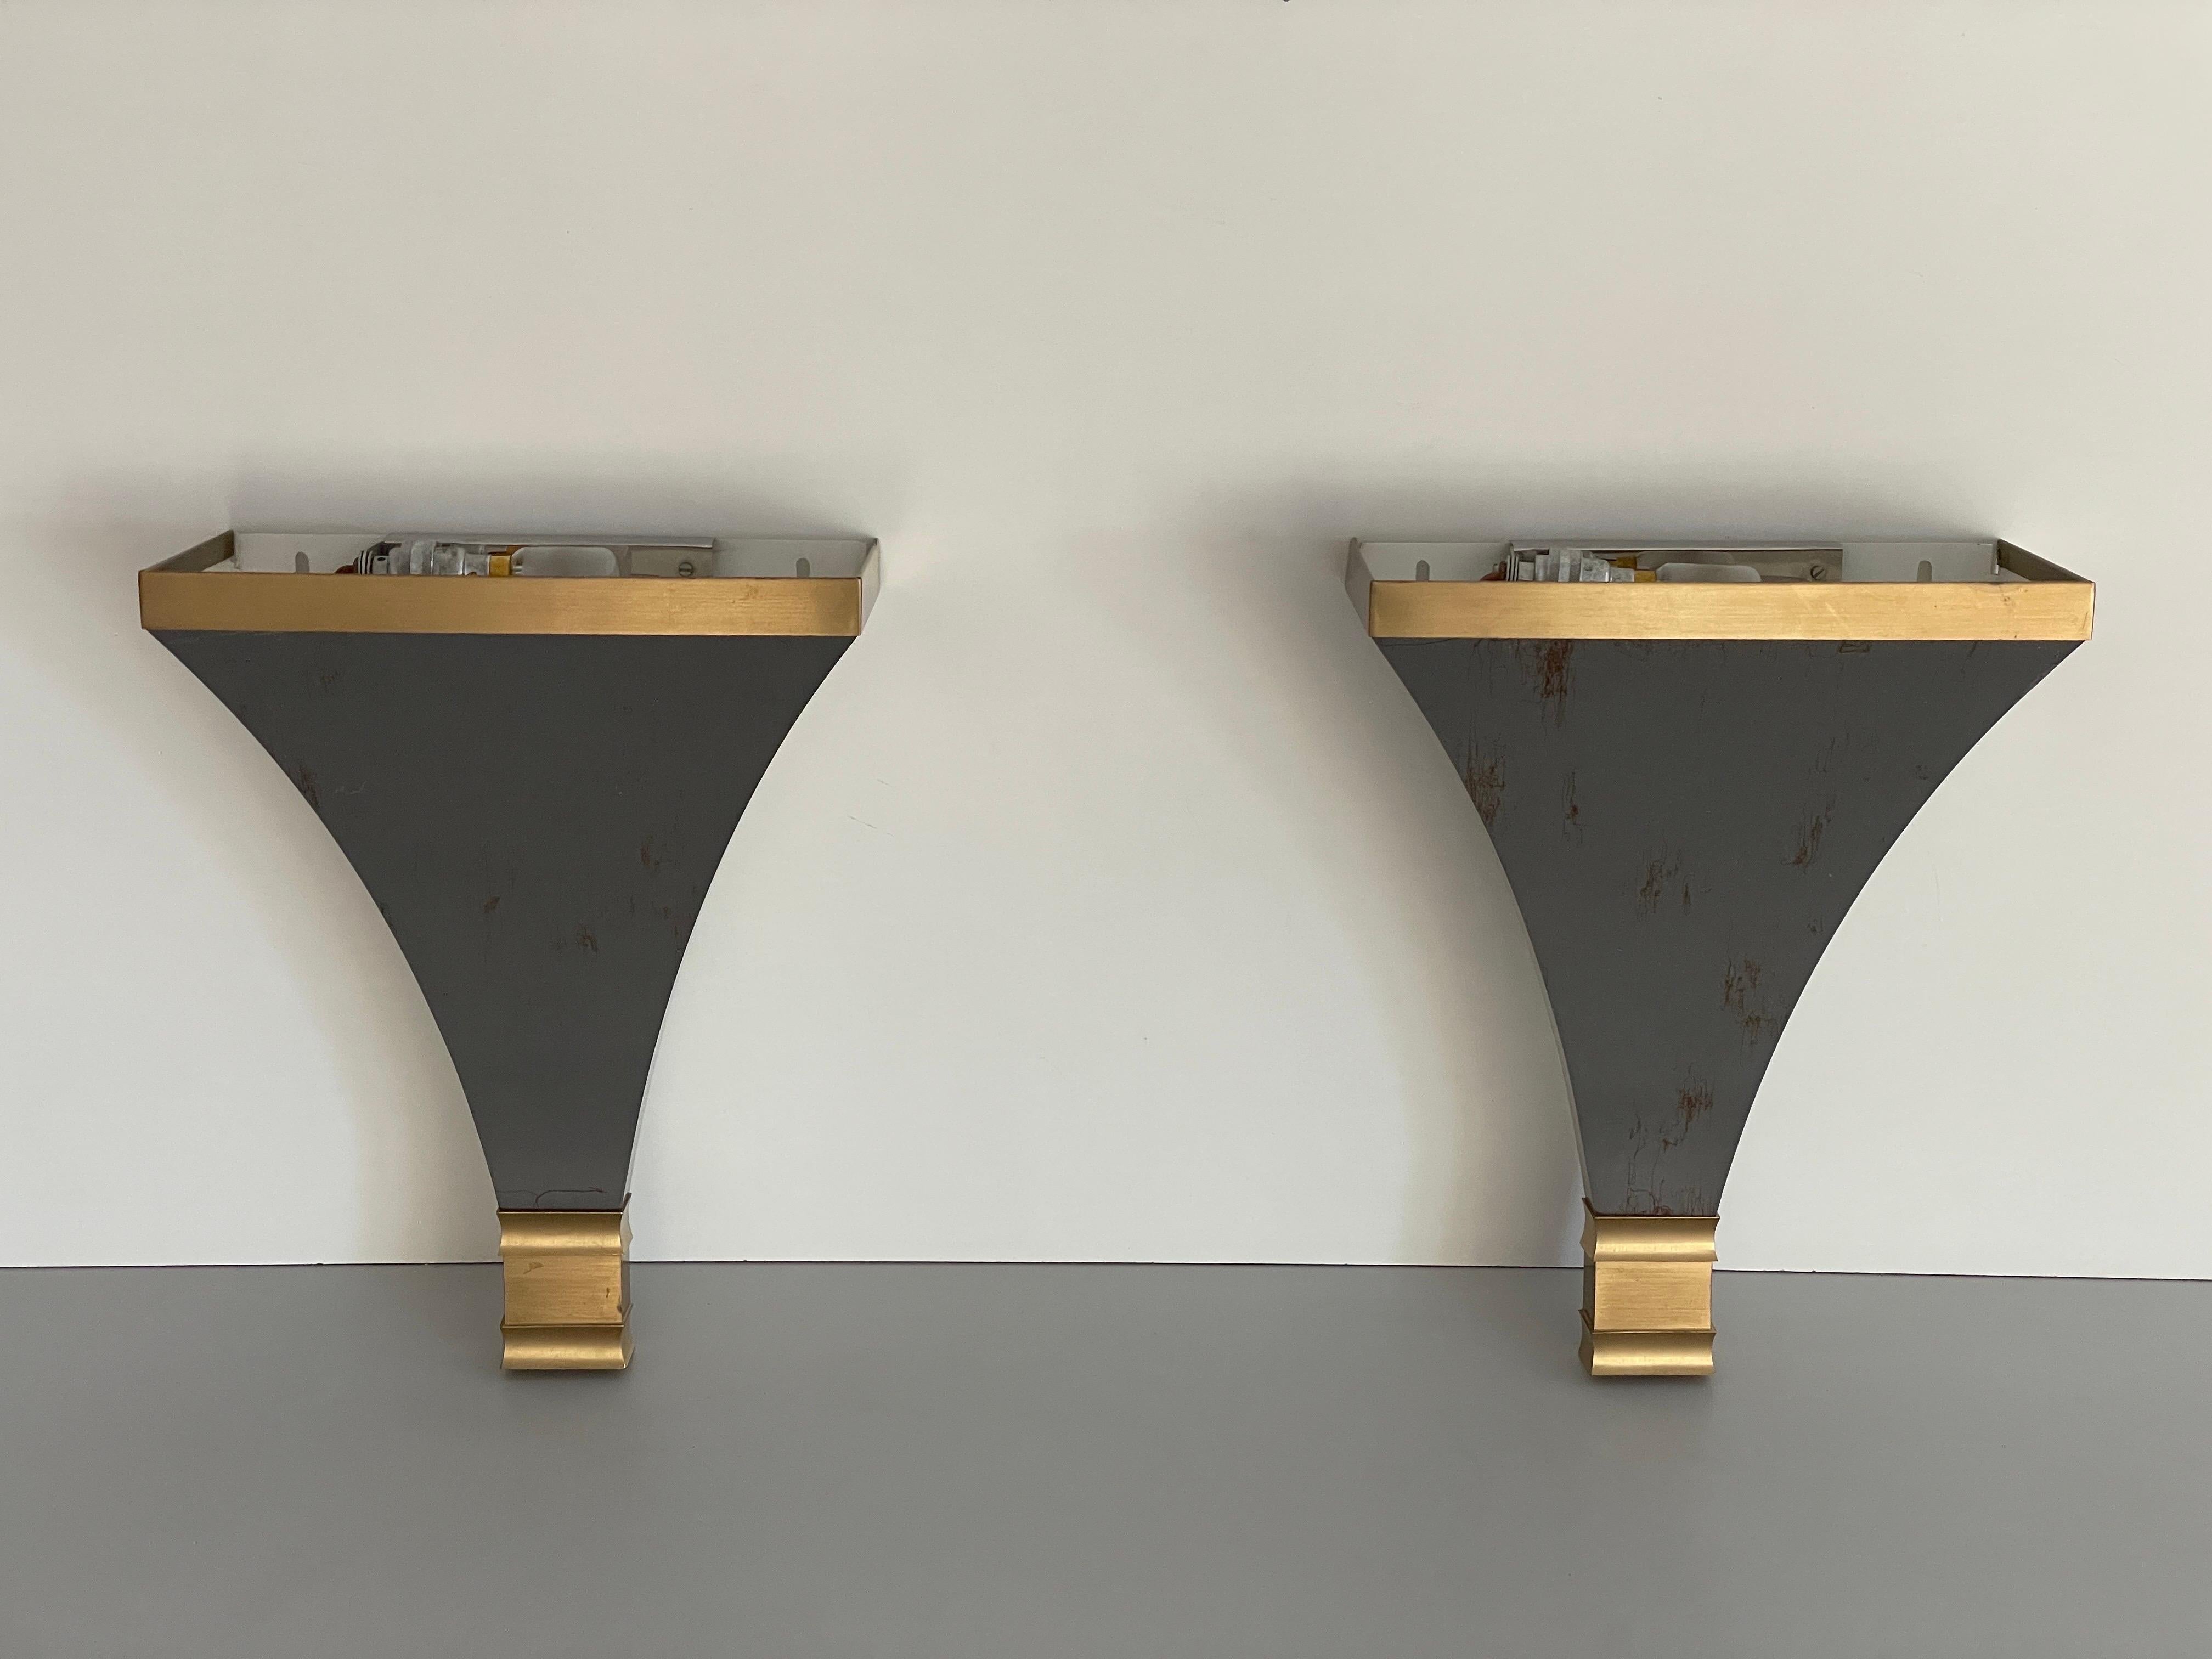 Space Age Grey and Gold metal Pair of Sconces by Art-Line, 1980s, Germany For Sale